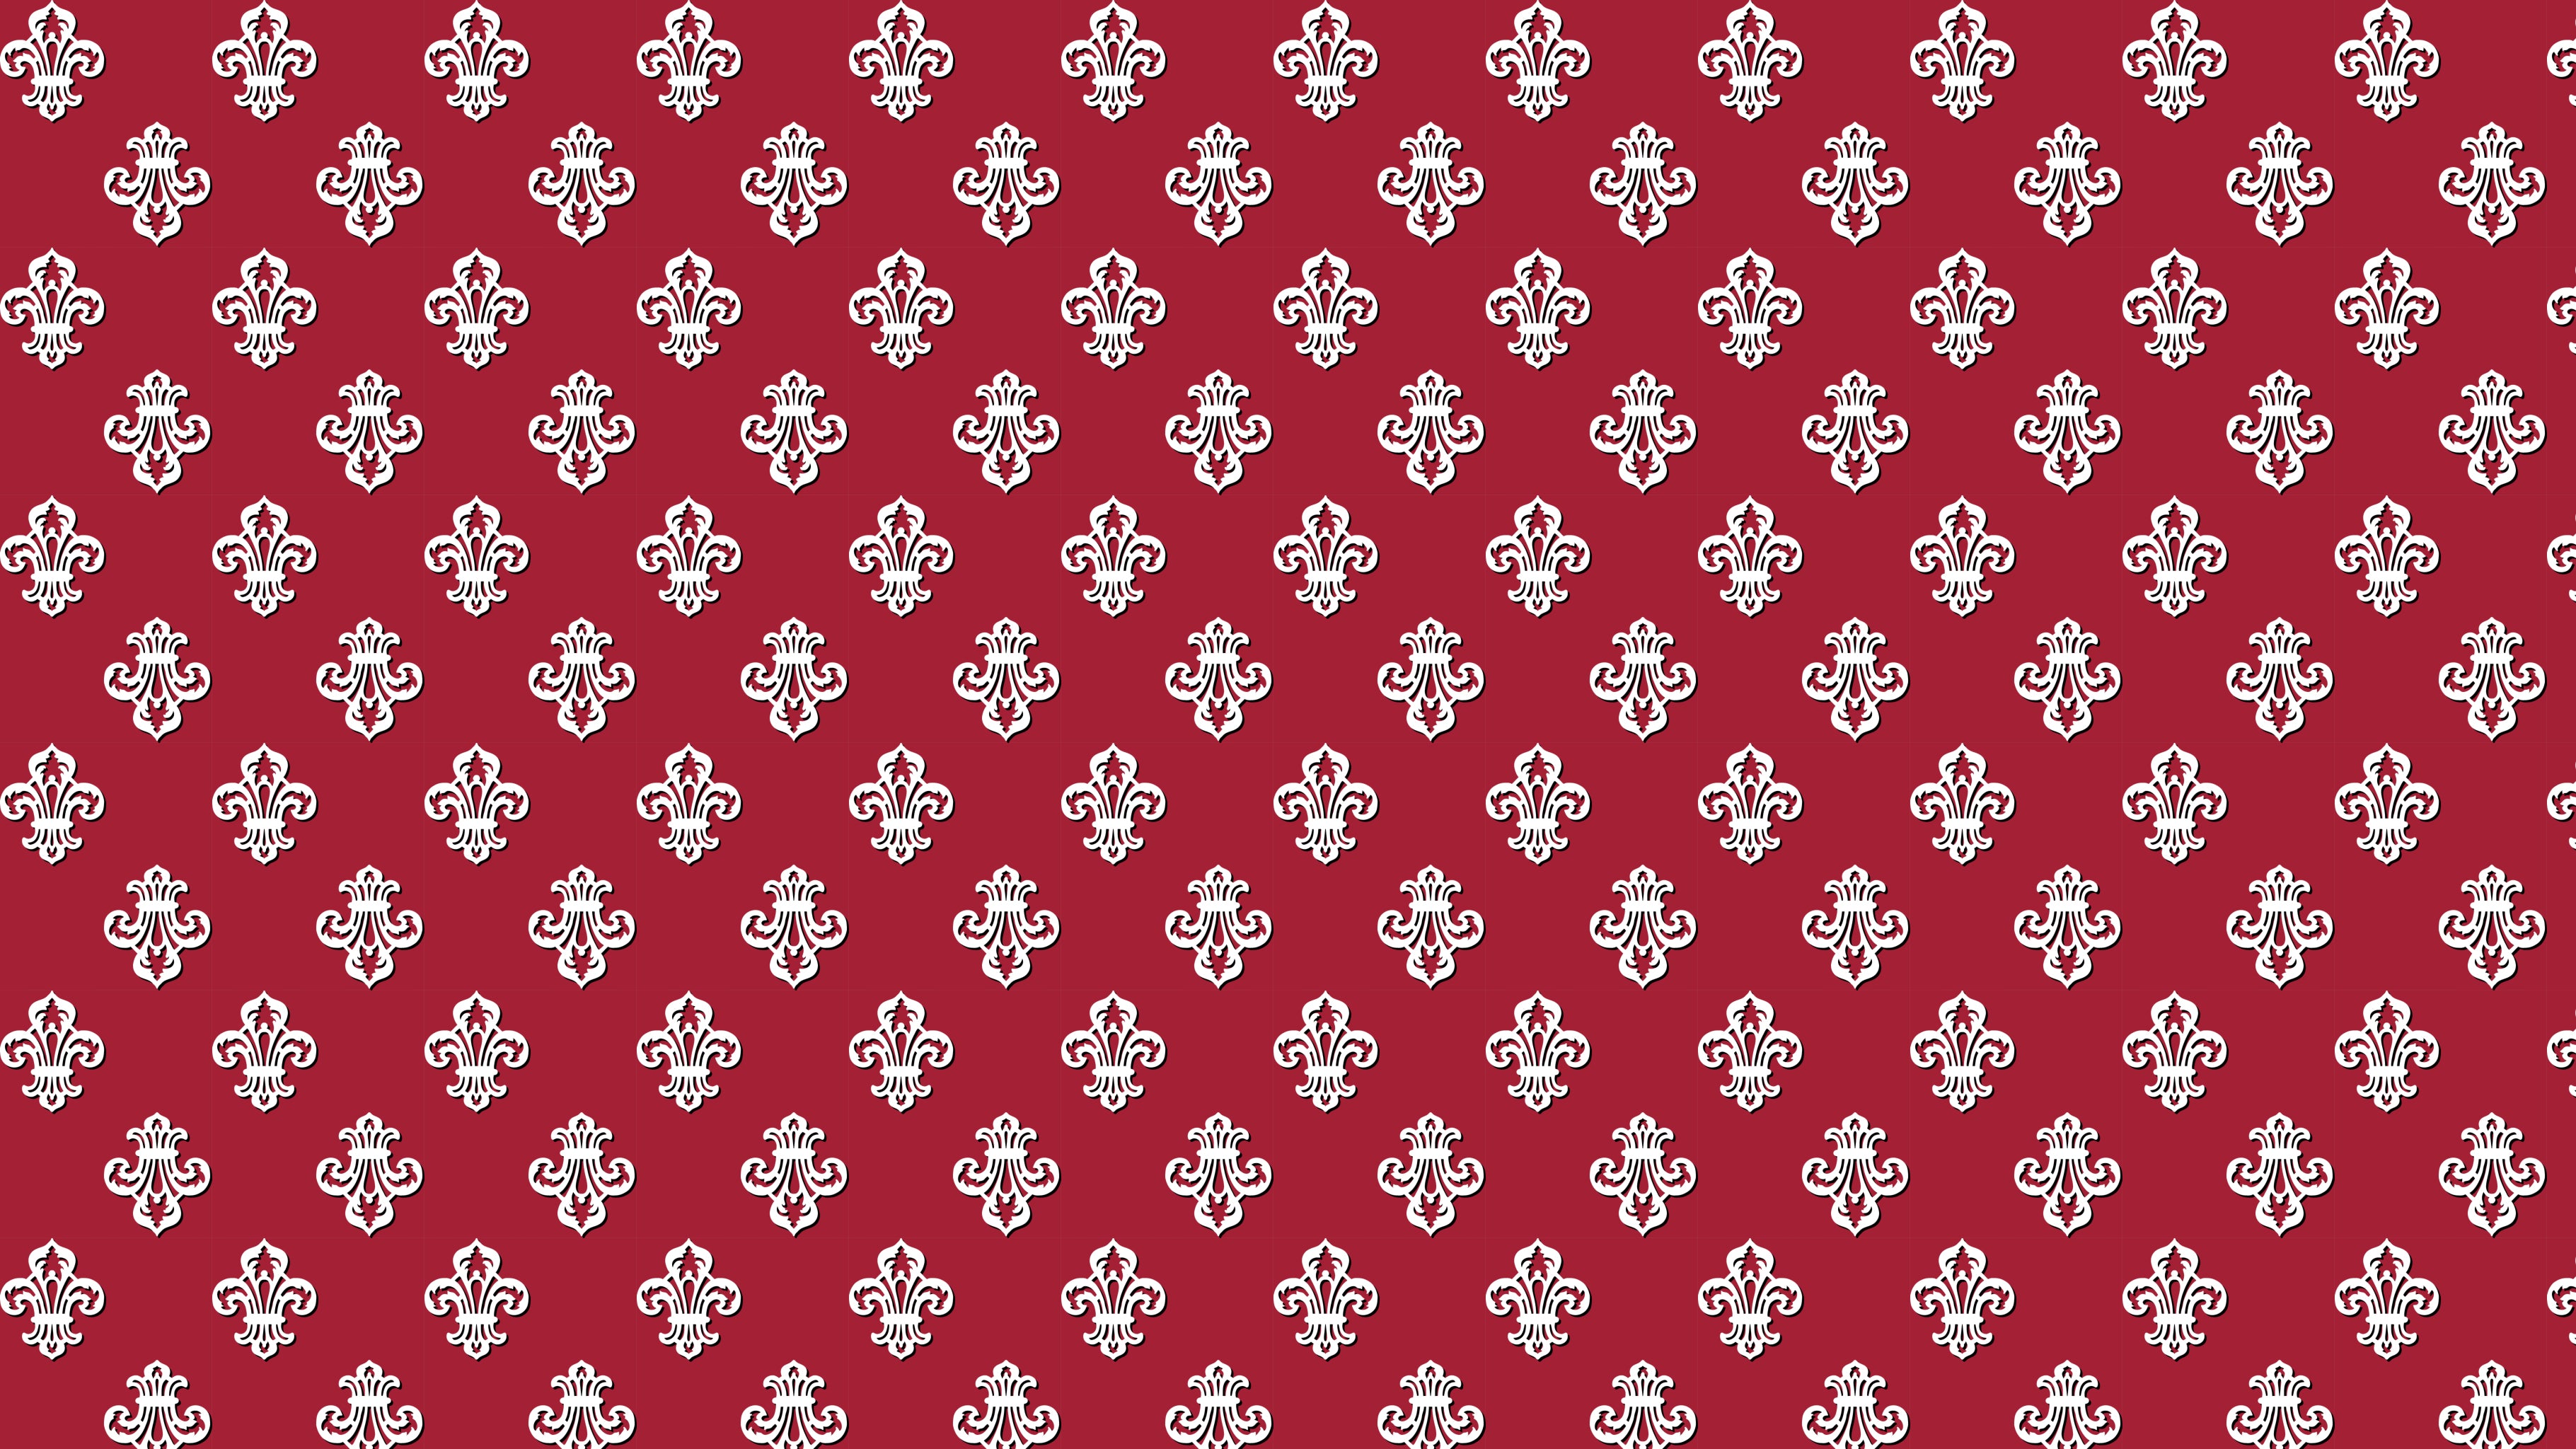 Fleur de Lis pattern in White and Black on Red background, by Studio Ten Design